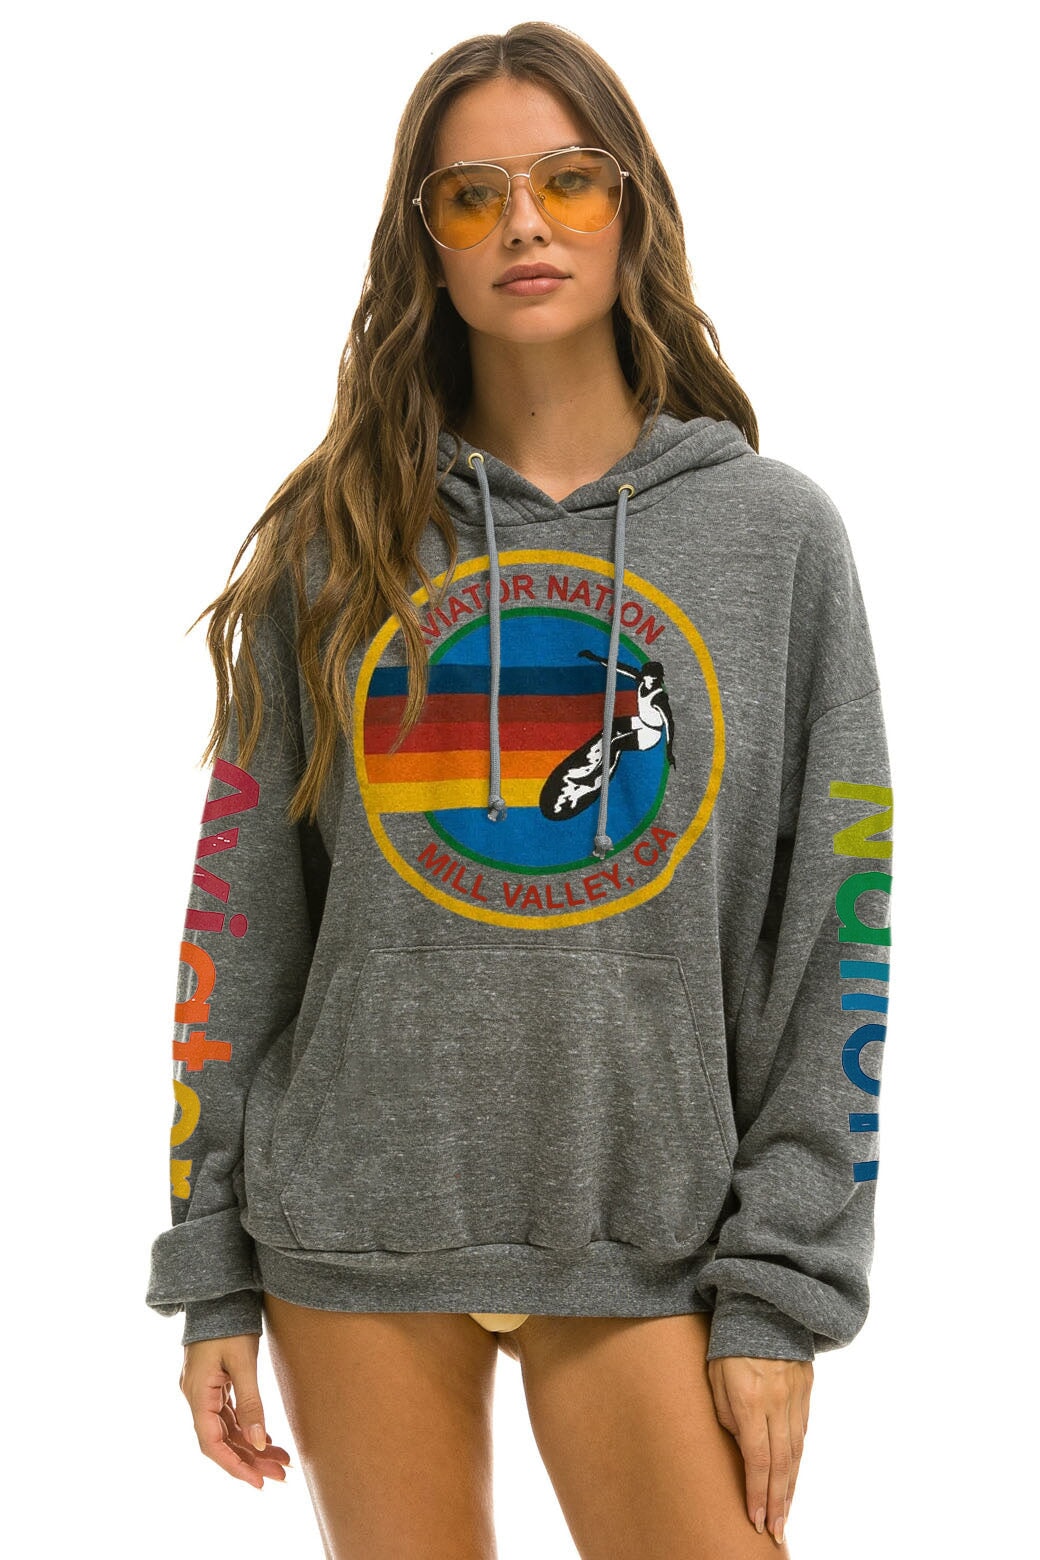 AVIATOR NATION MILL VALLEY RELAXED PULLOVER HOODIE - HEATHER GREY Hoodie Aviator Nation 